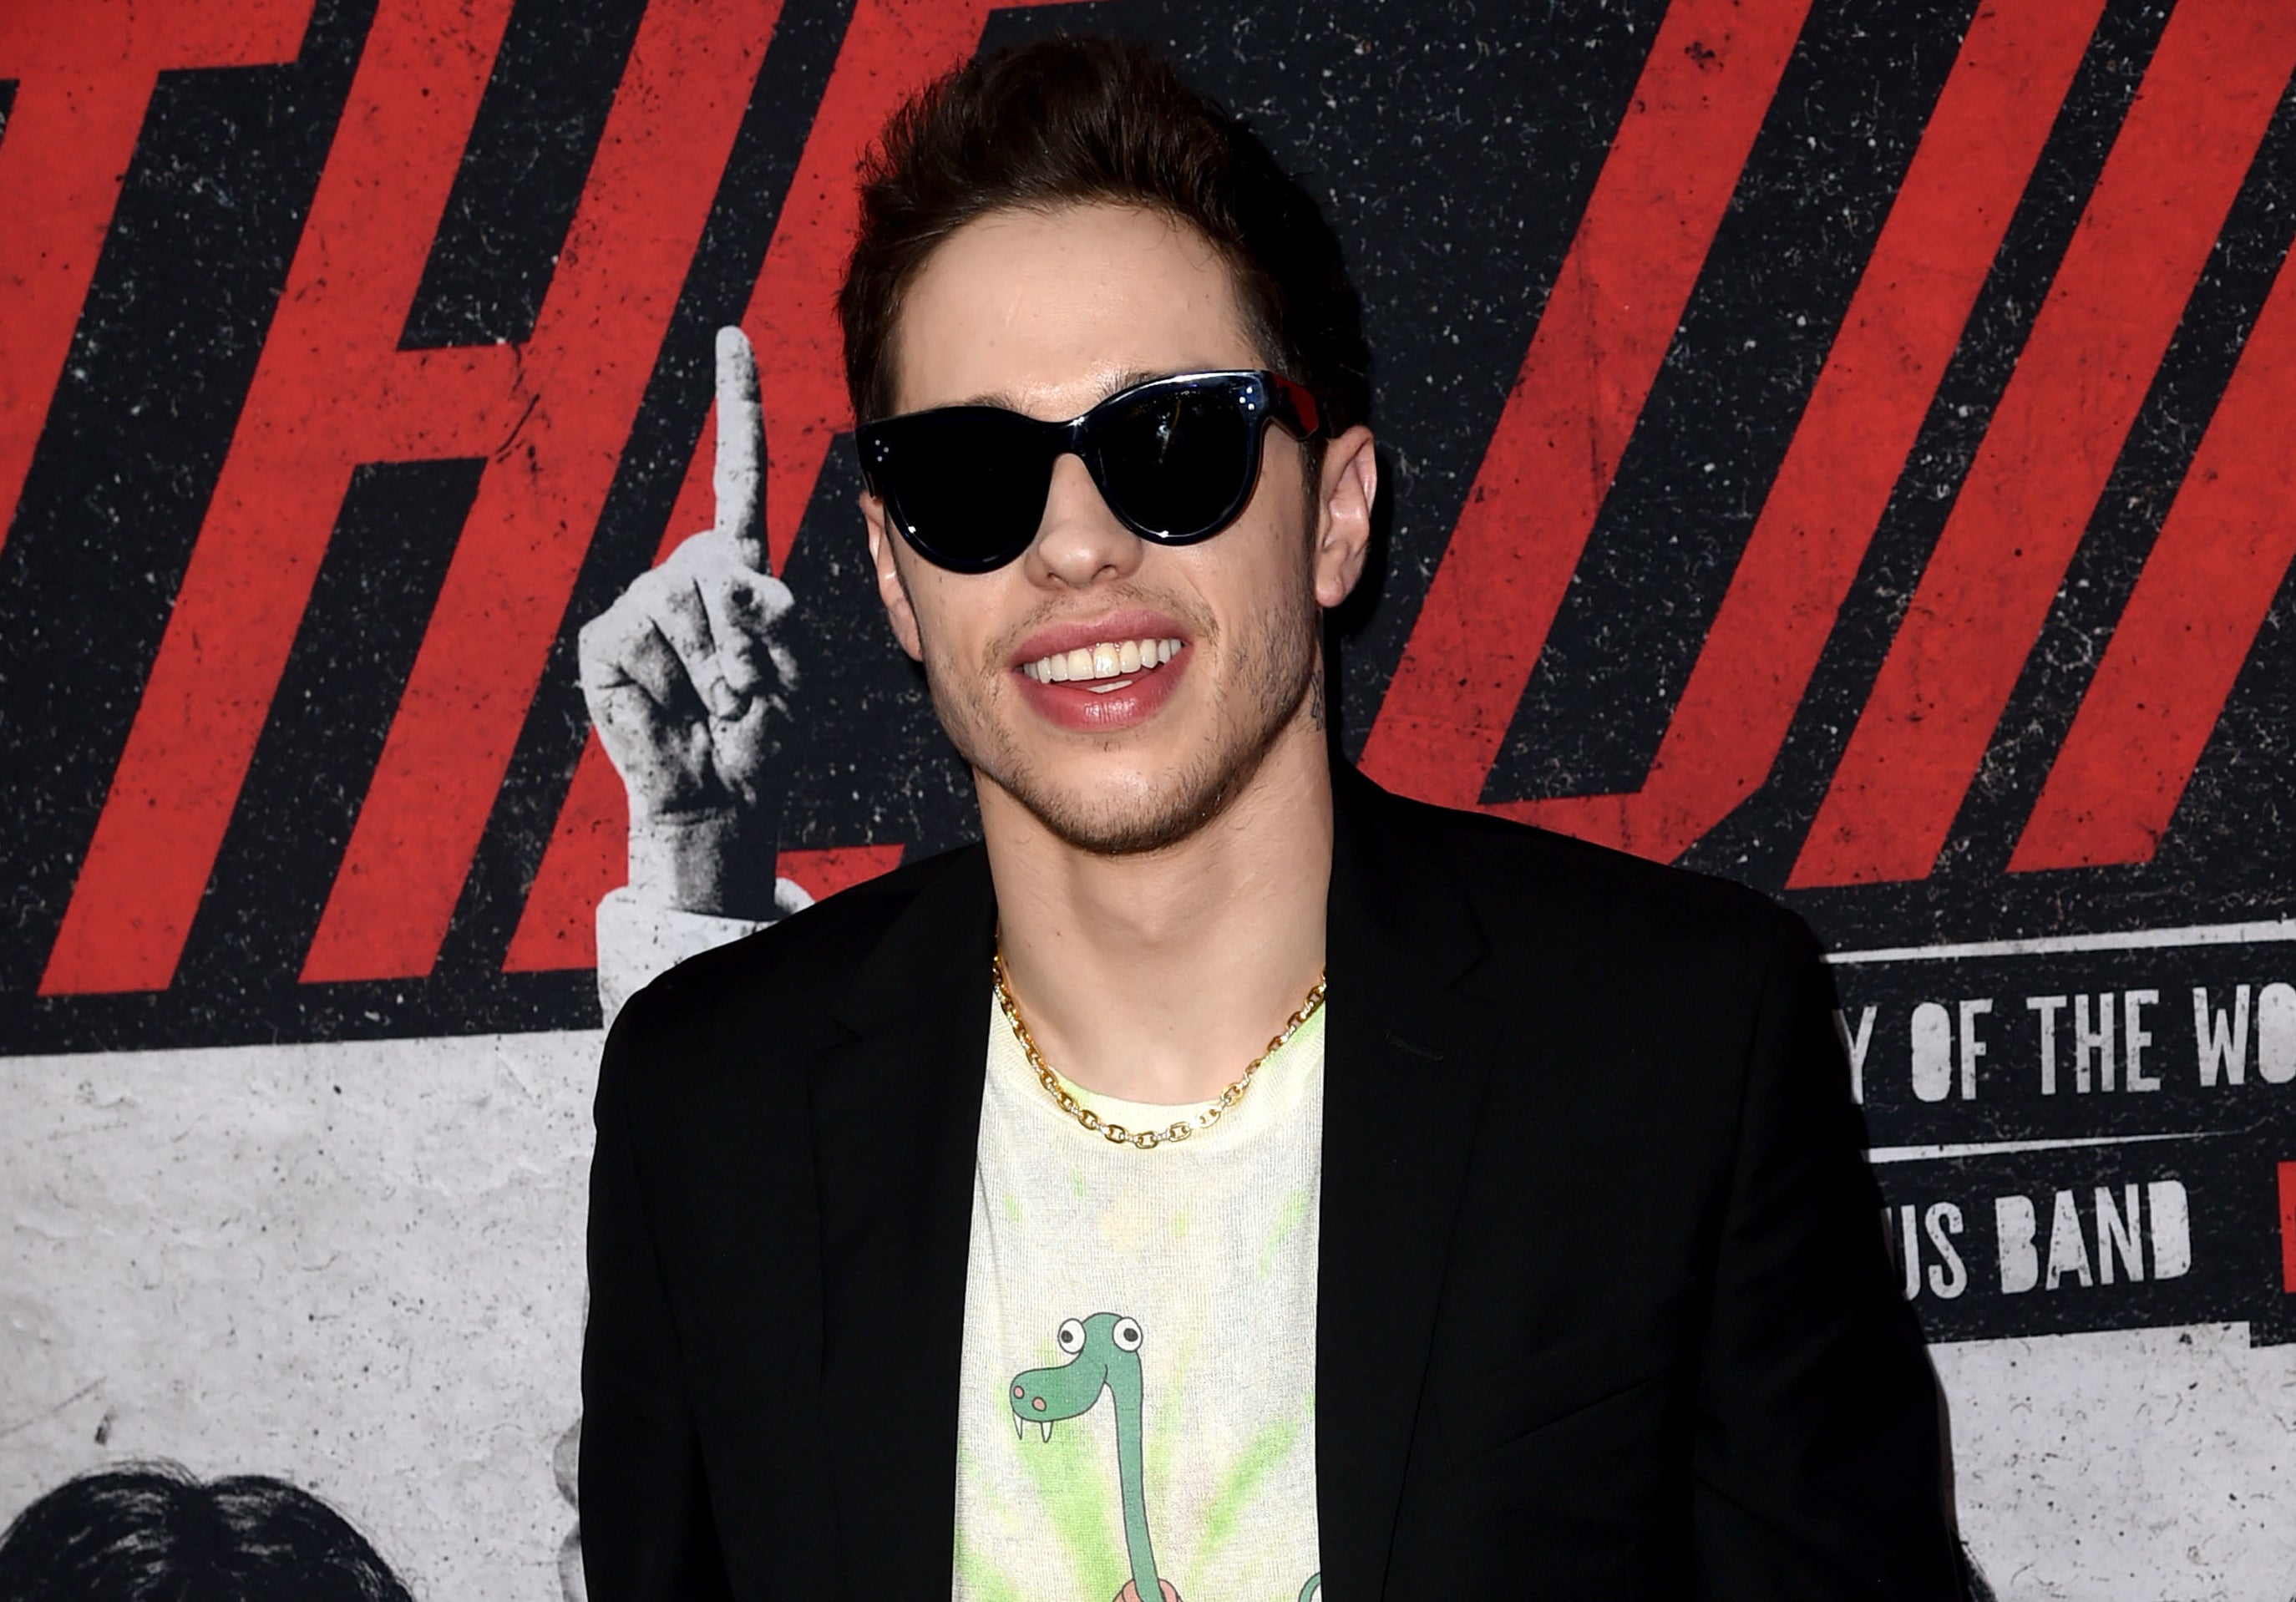 Pete wears sunglasses and a dinosaur T-shirt to an event